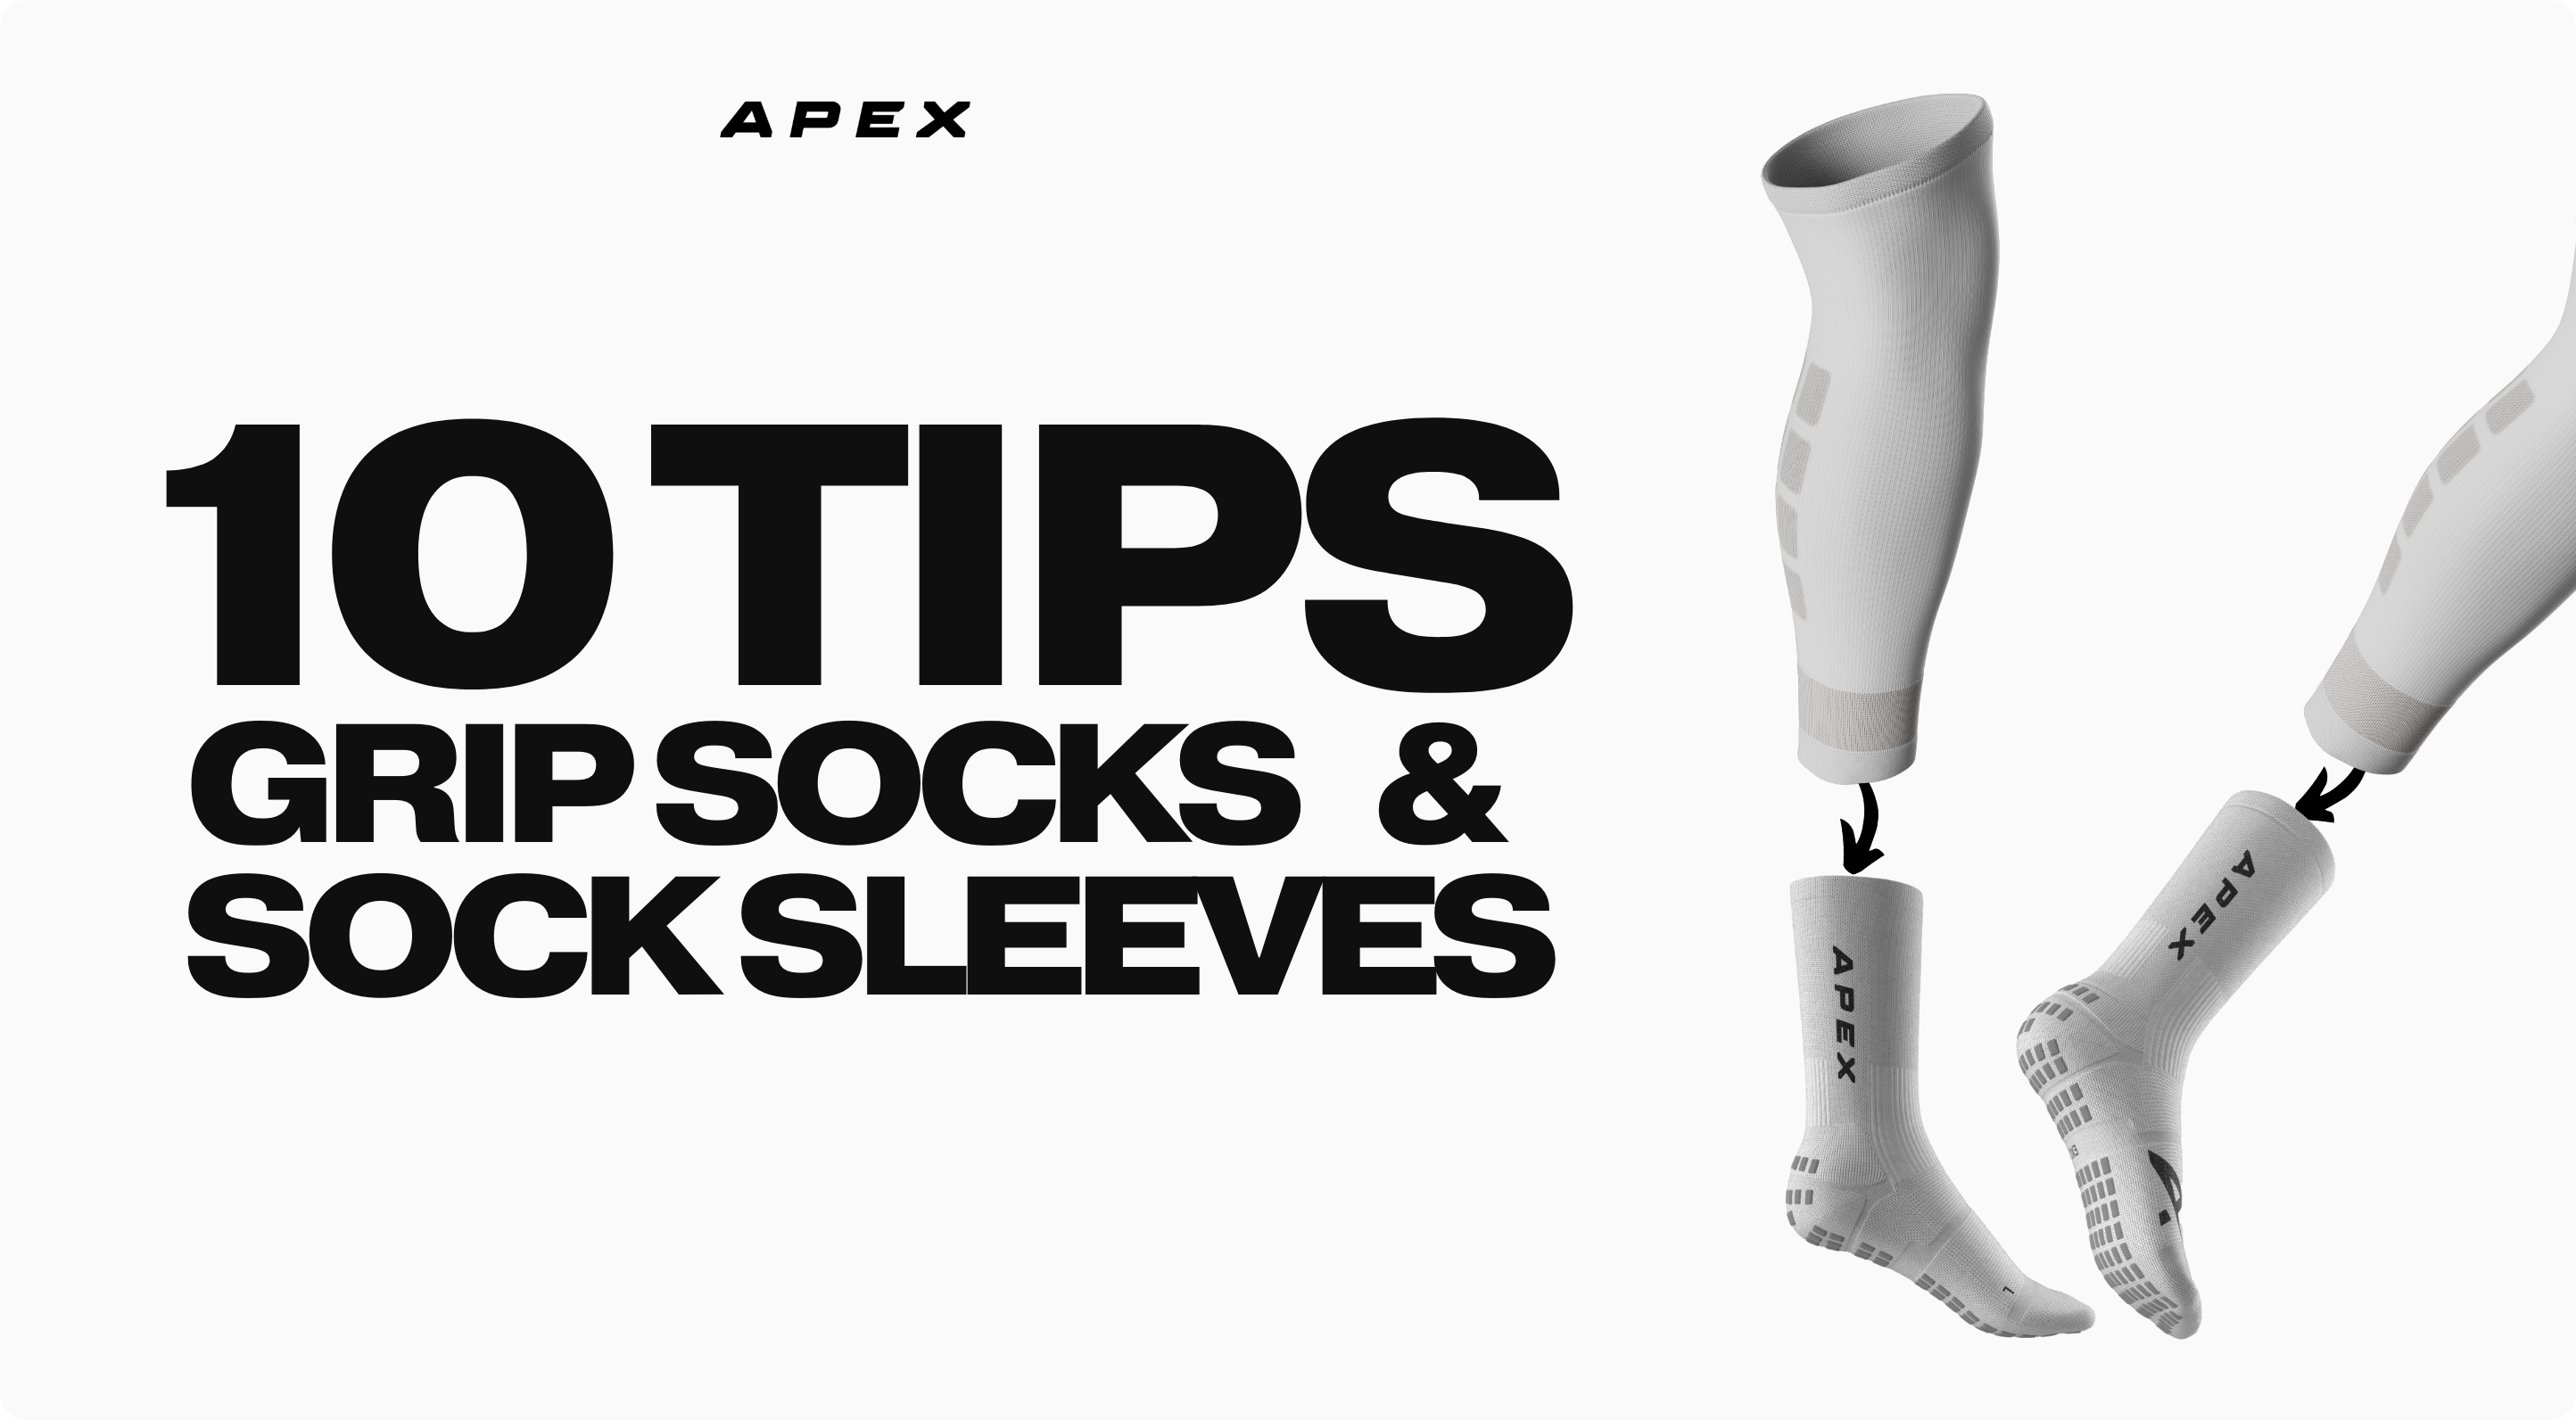 Why do 72% of PRO Players wear grip socks?